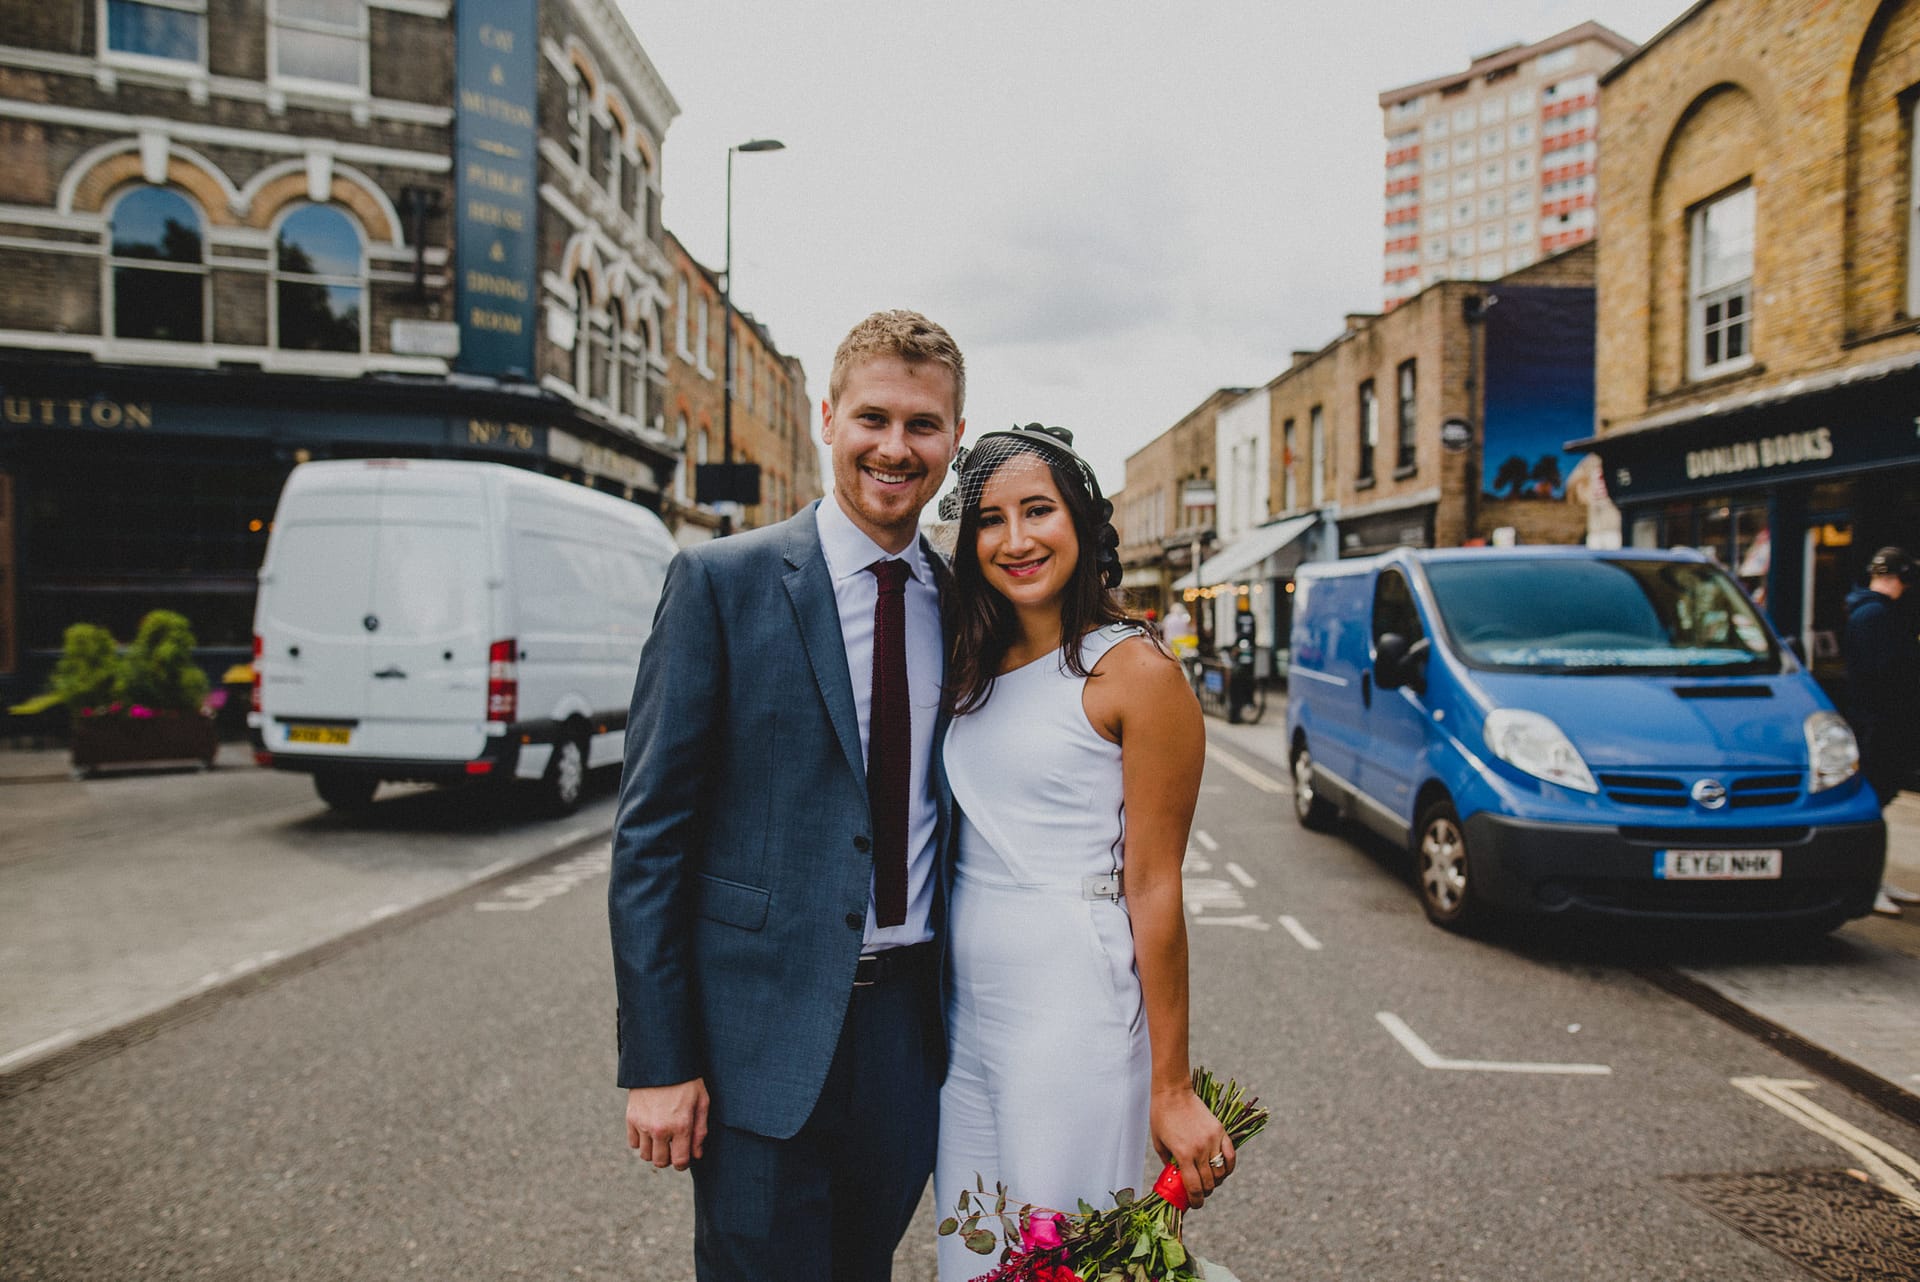 a portrait of a bride and groom in an East London street